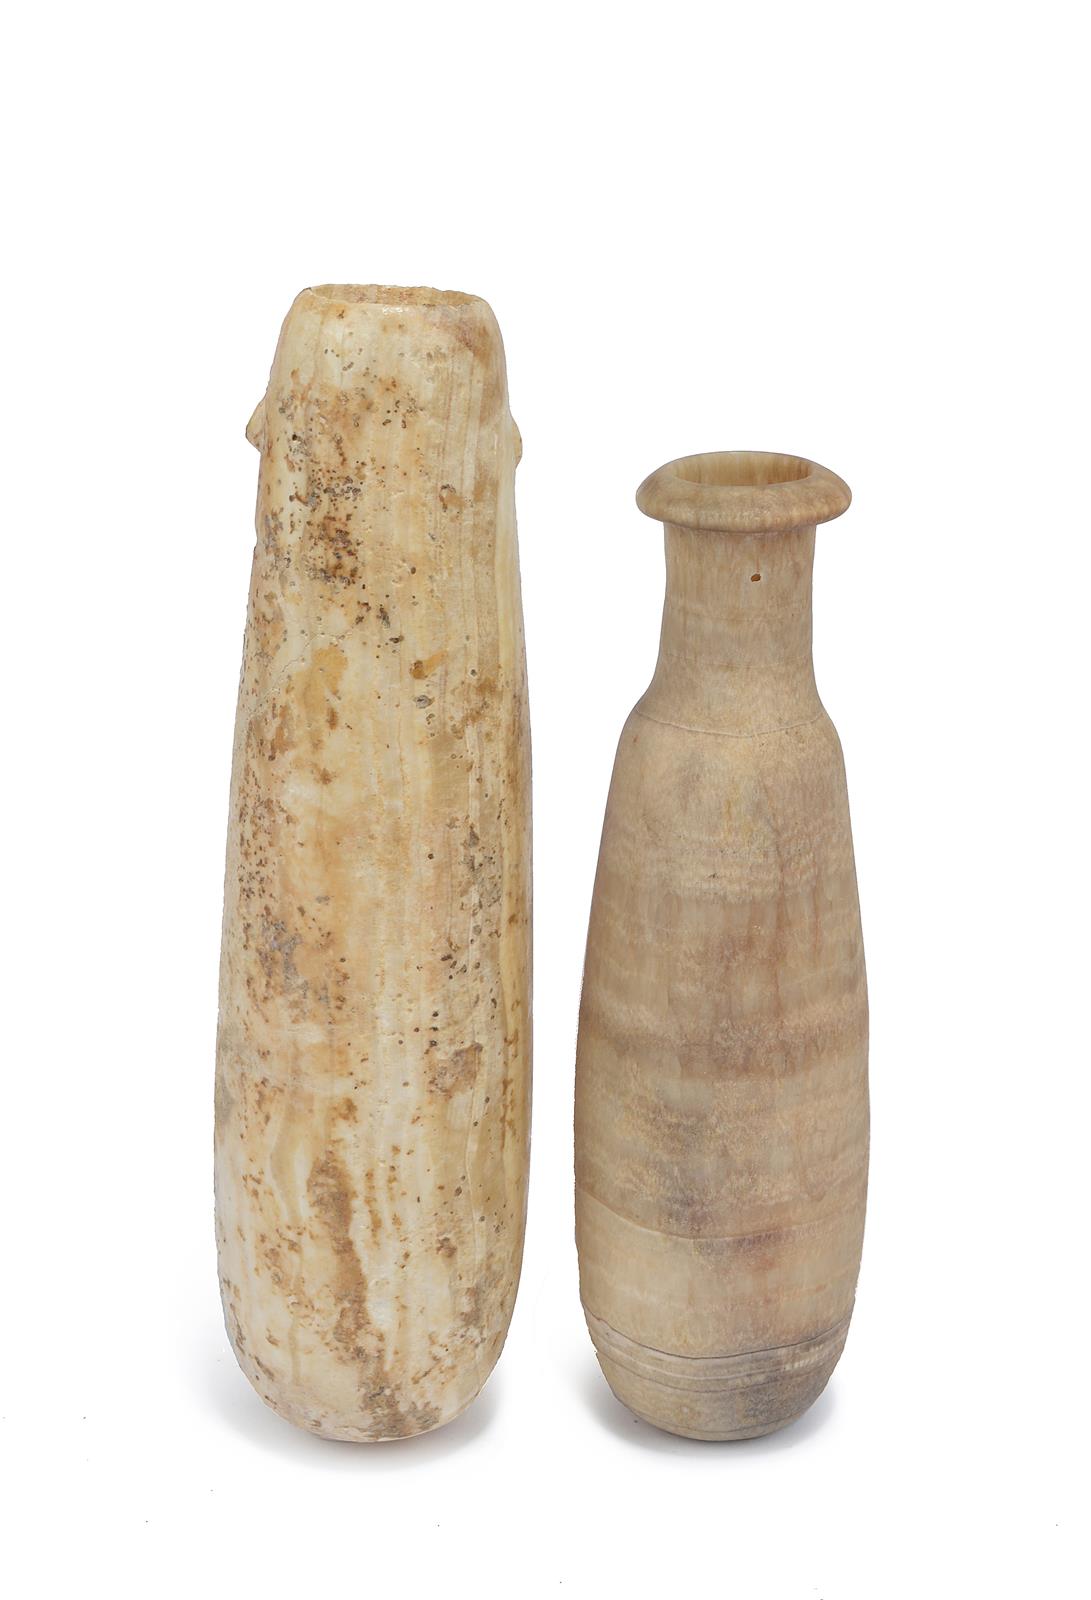 Two Egyptian alabaster alabastron Late Period, circa 664 - 332 BC one with a rounded base and a